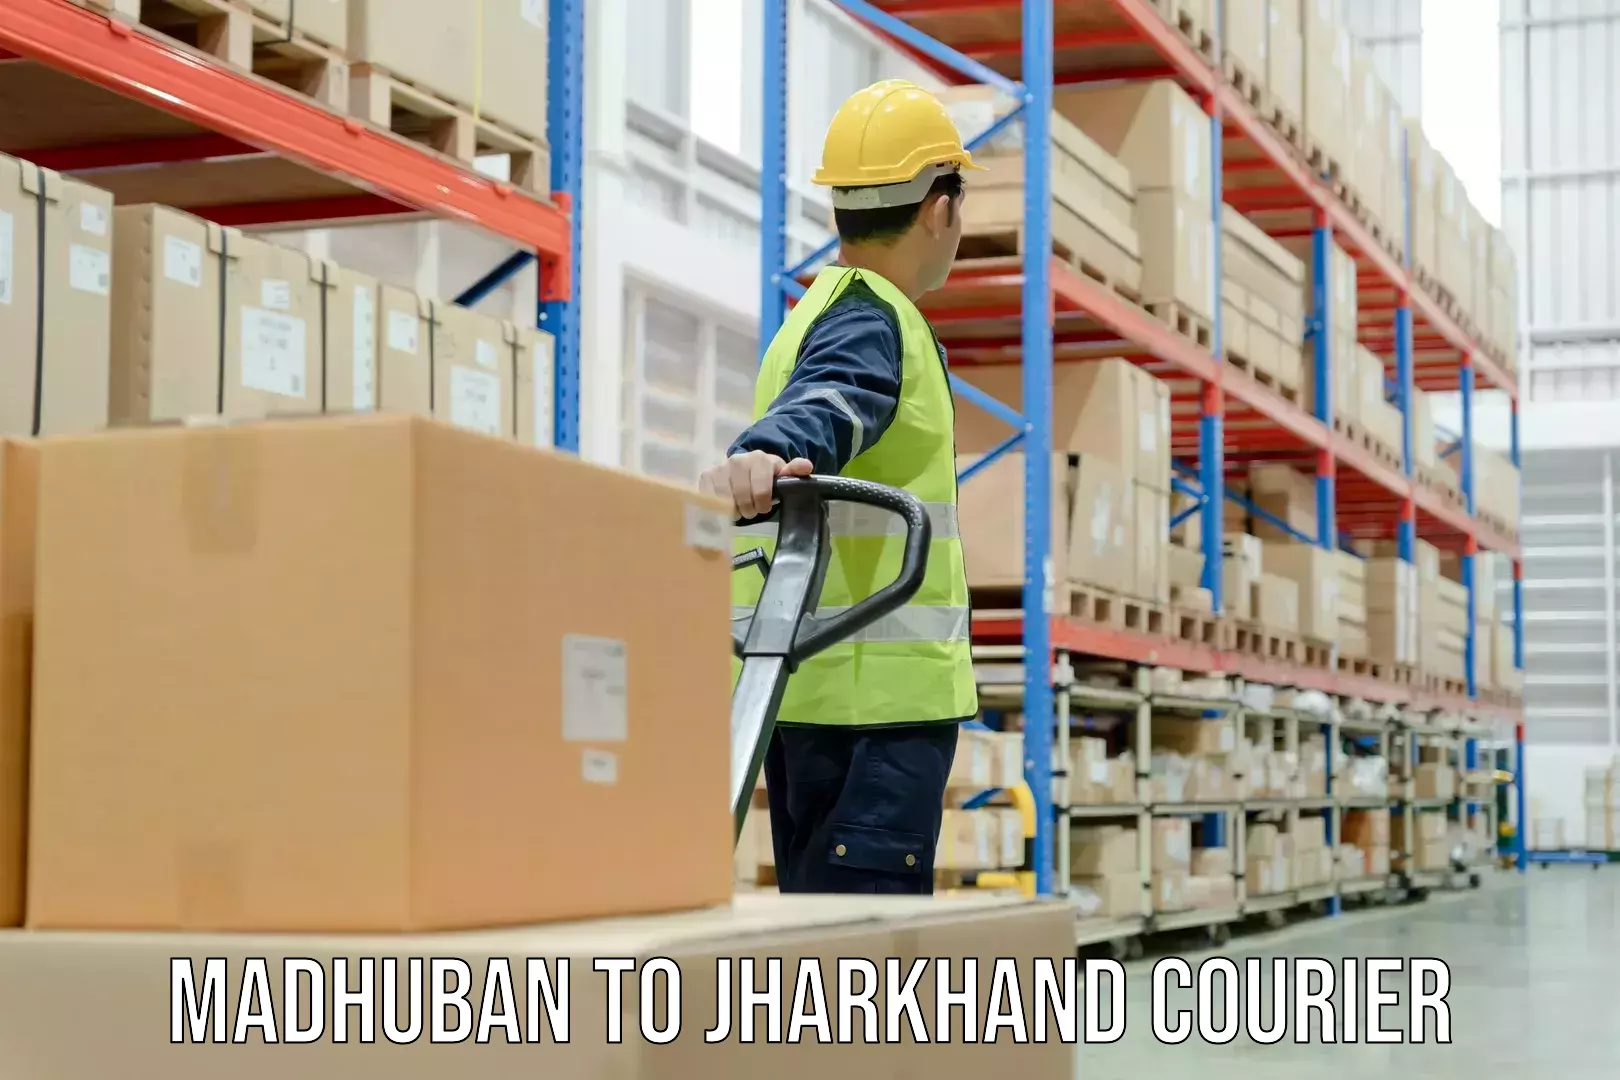 Same-day delivery solutions Madhuban to Peterbar